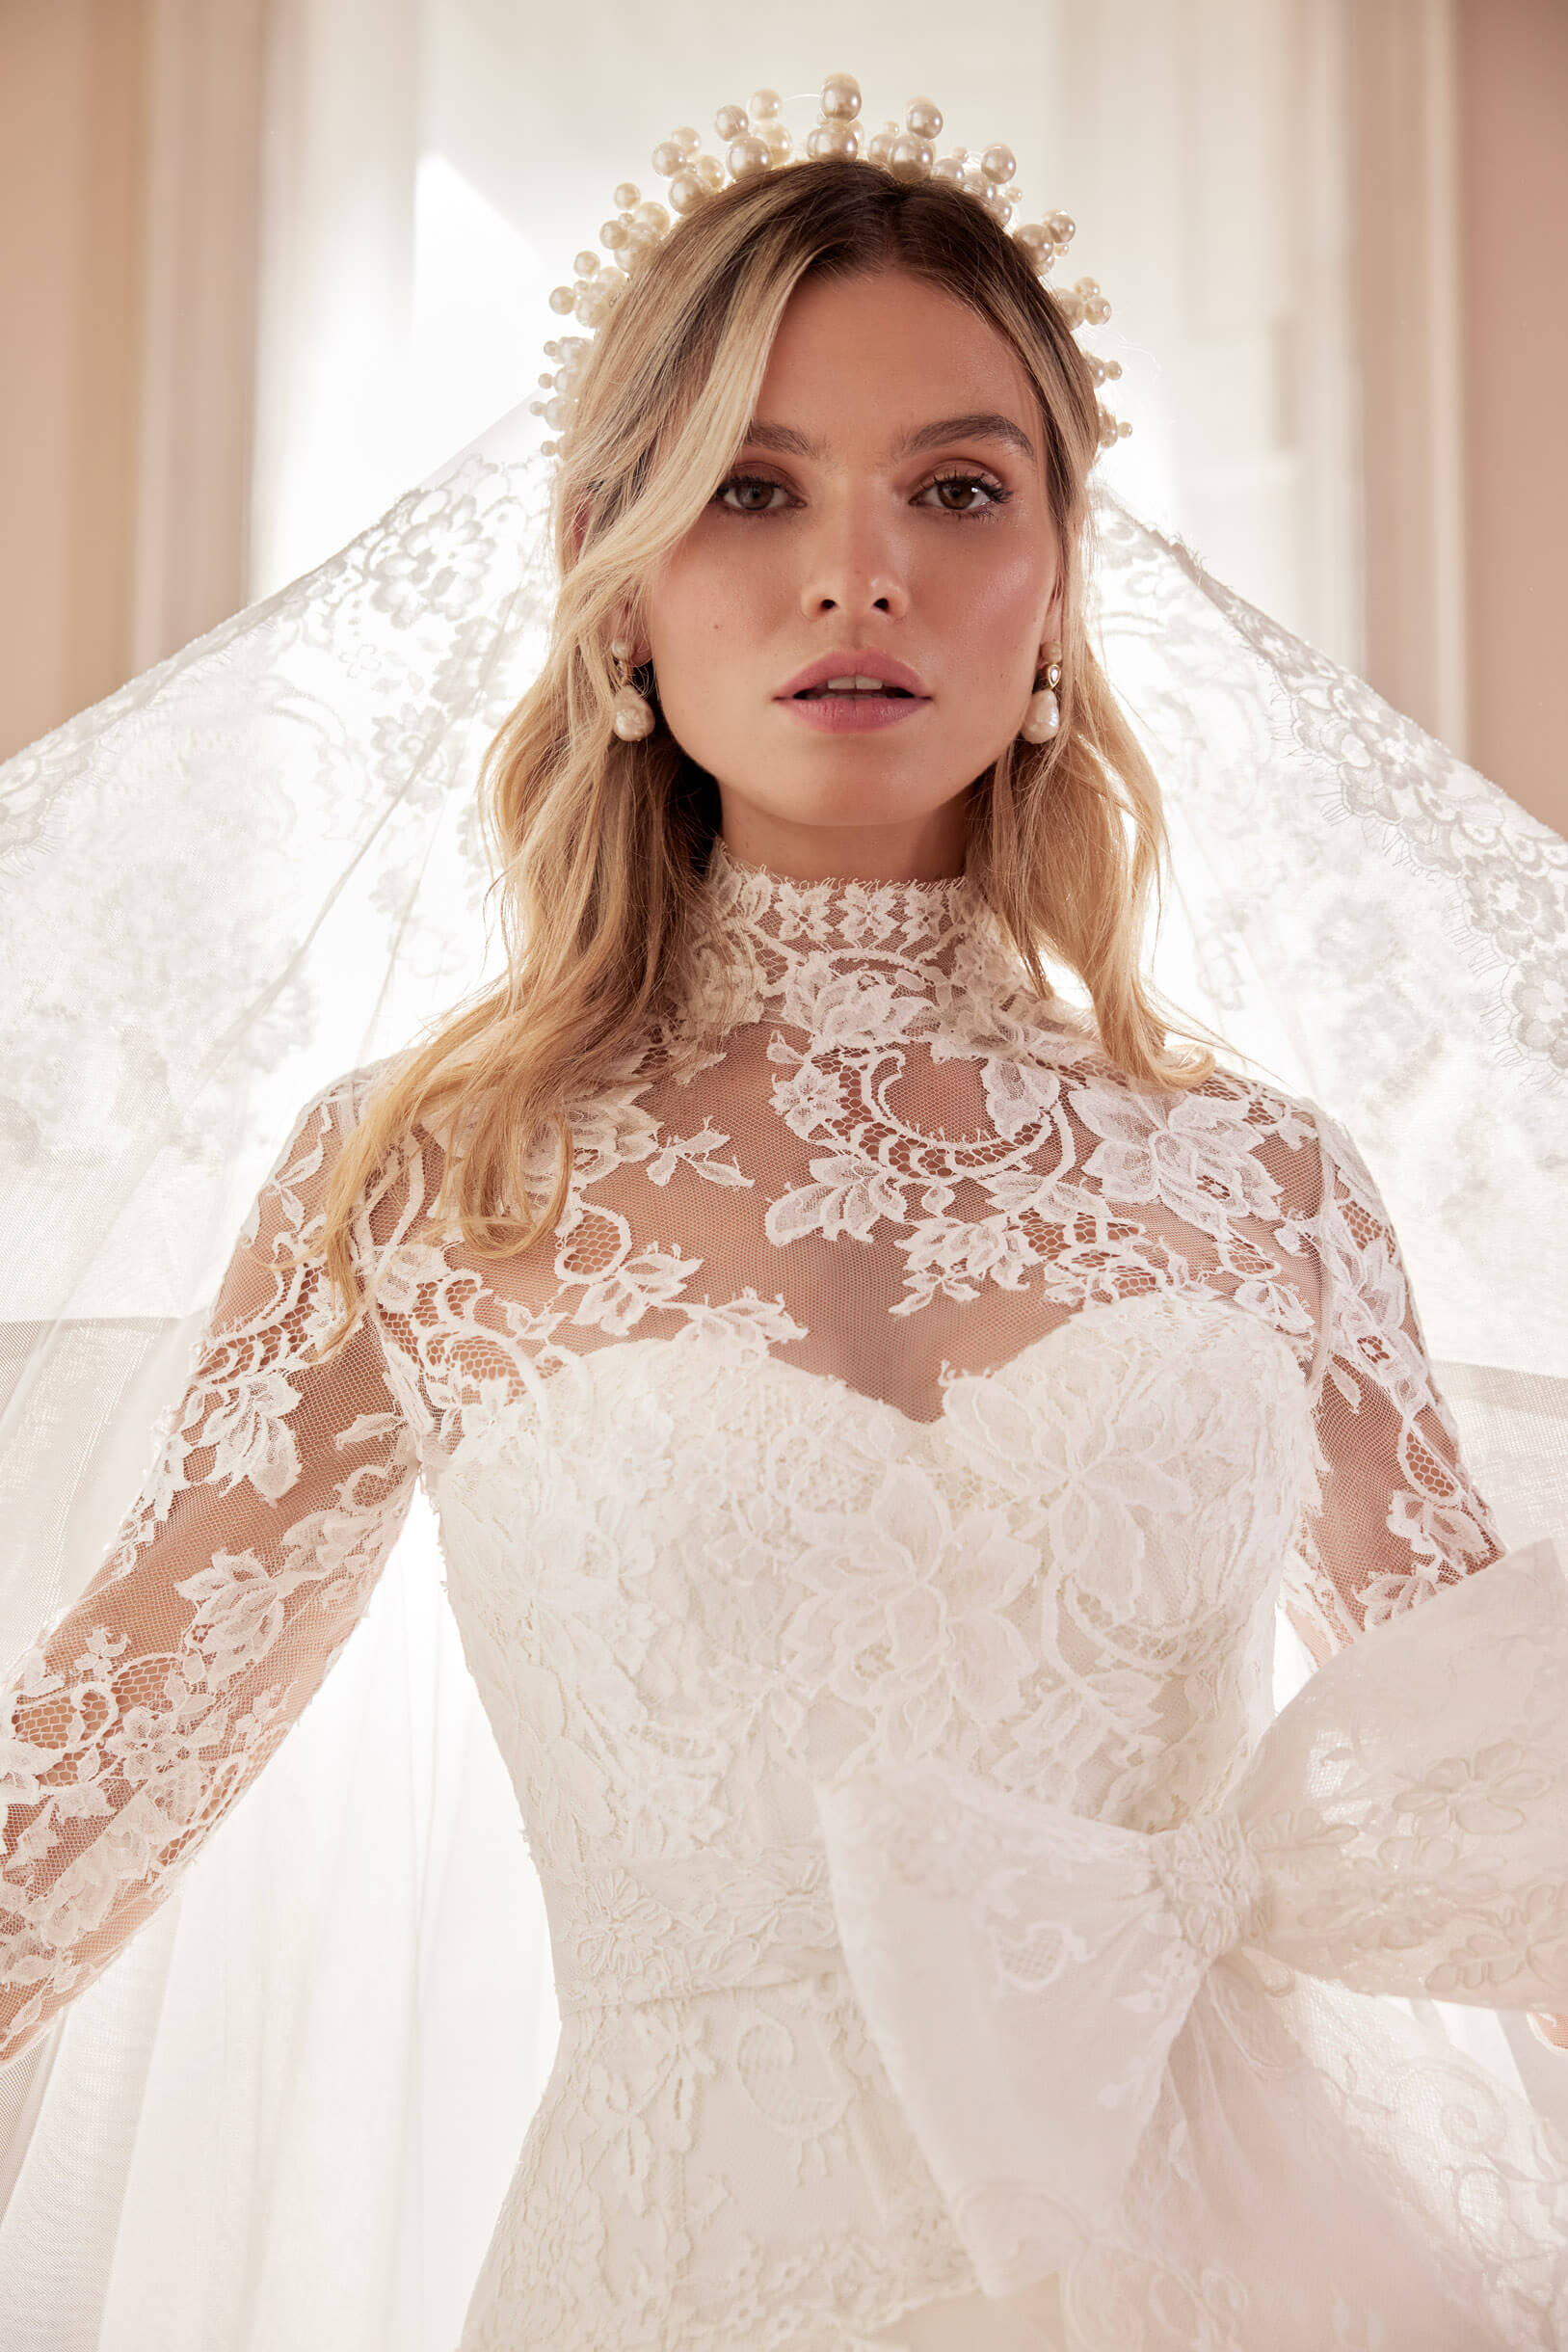 Charlotte - Long sleeve wool and silk top with neckline in precious leavers  lace